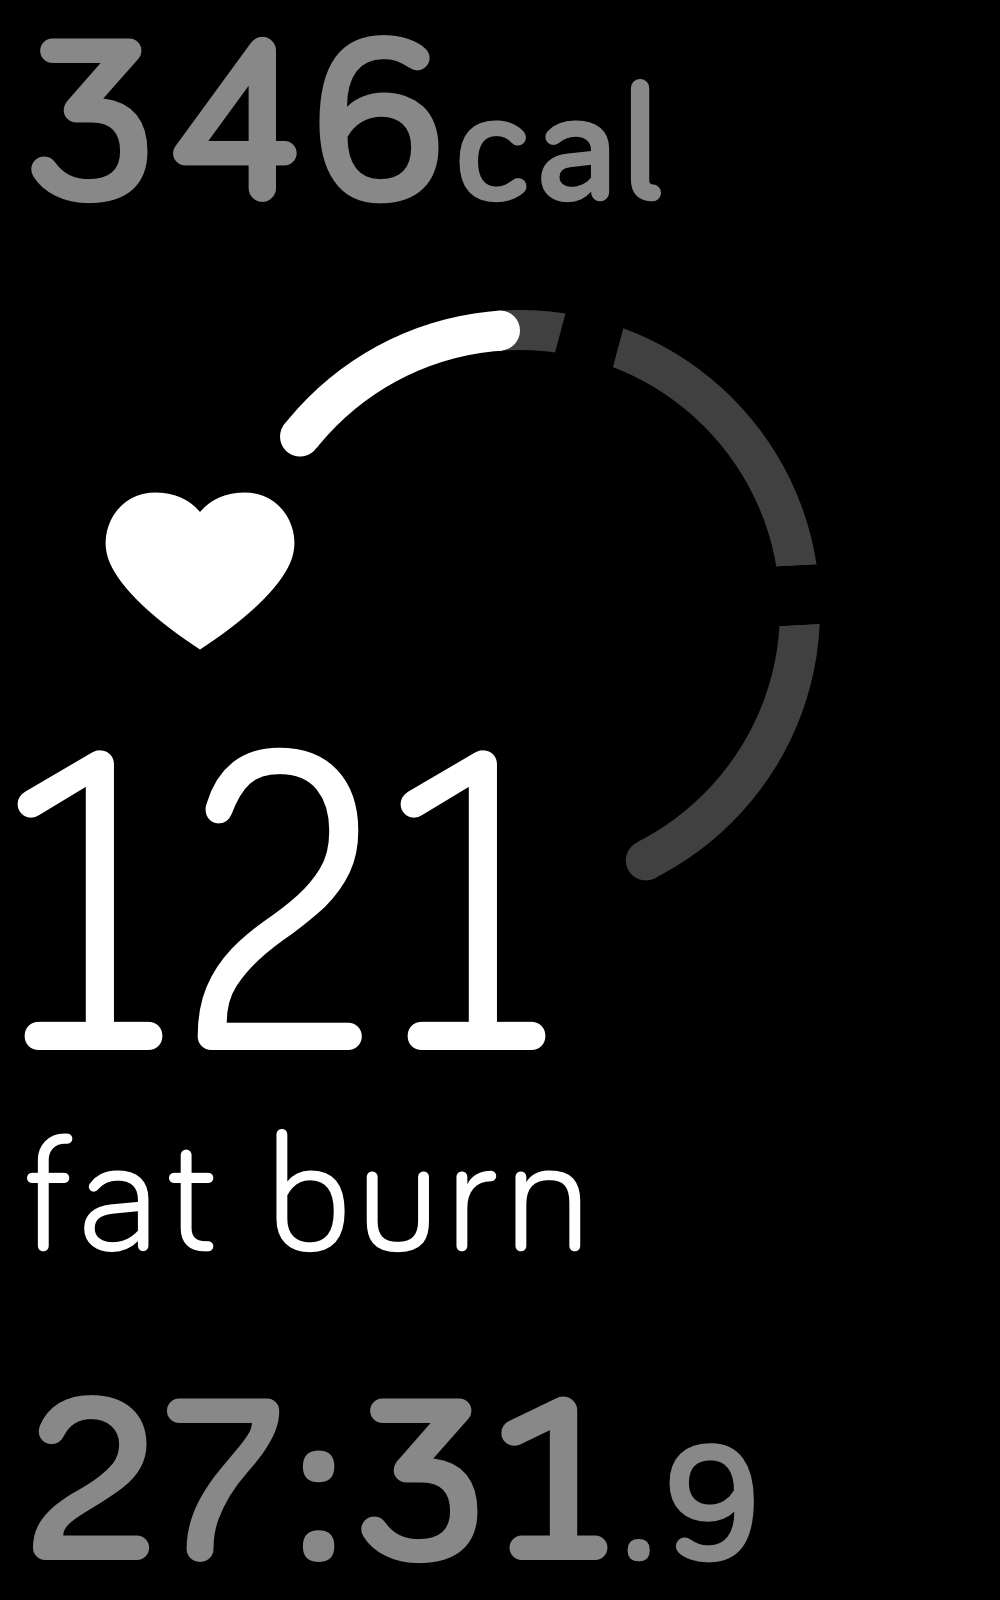 Workout in progress where the heart rate is the fat burn zone